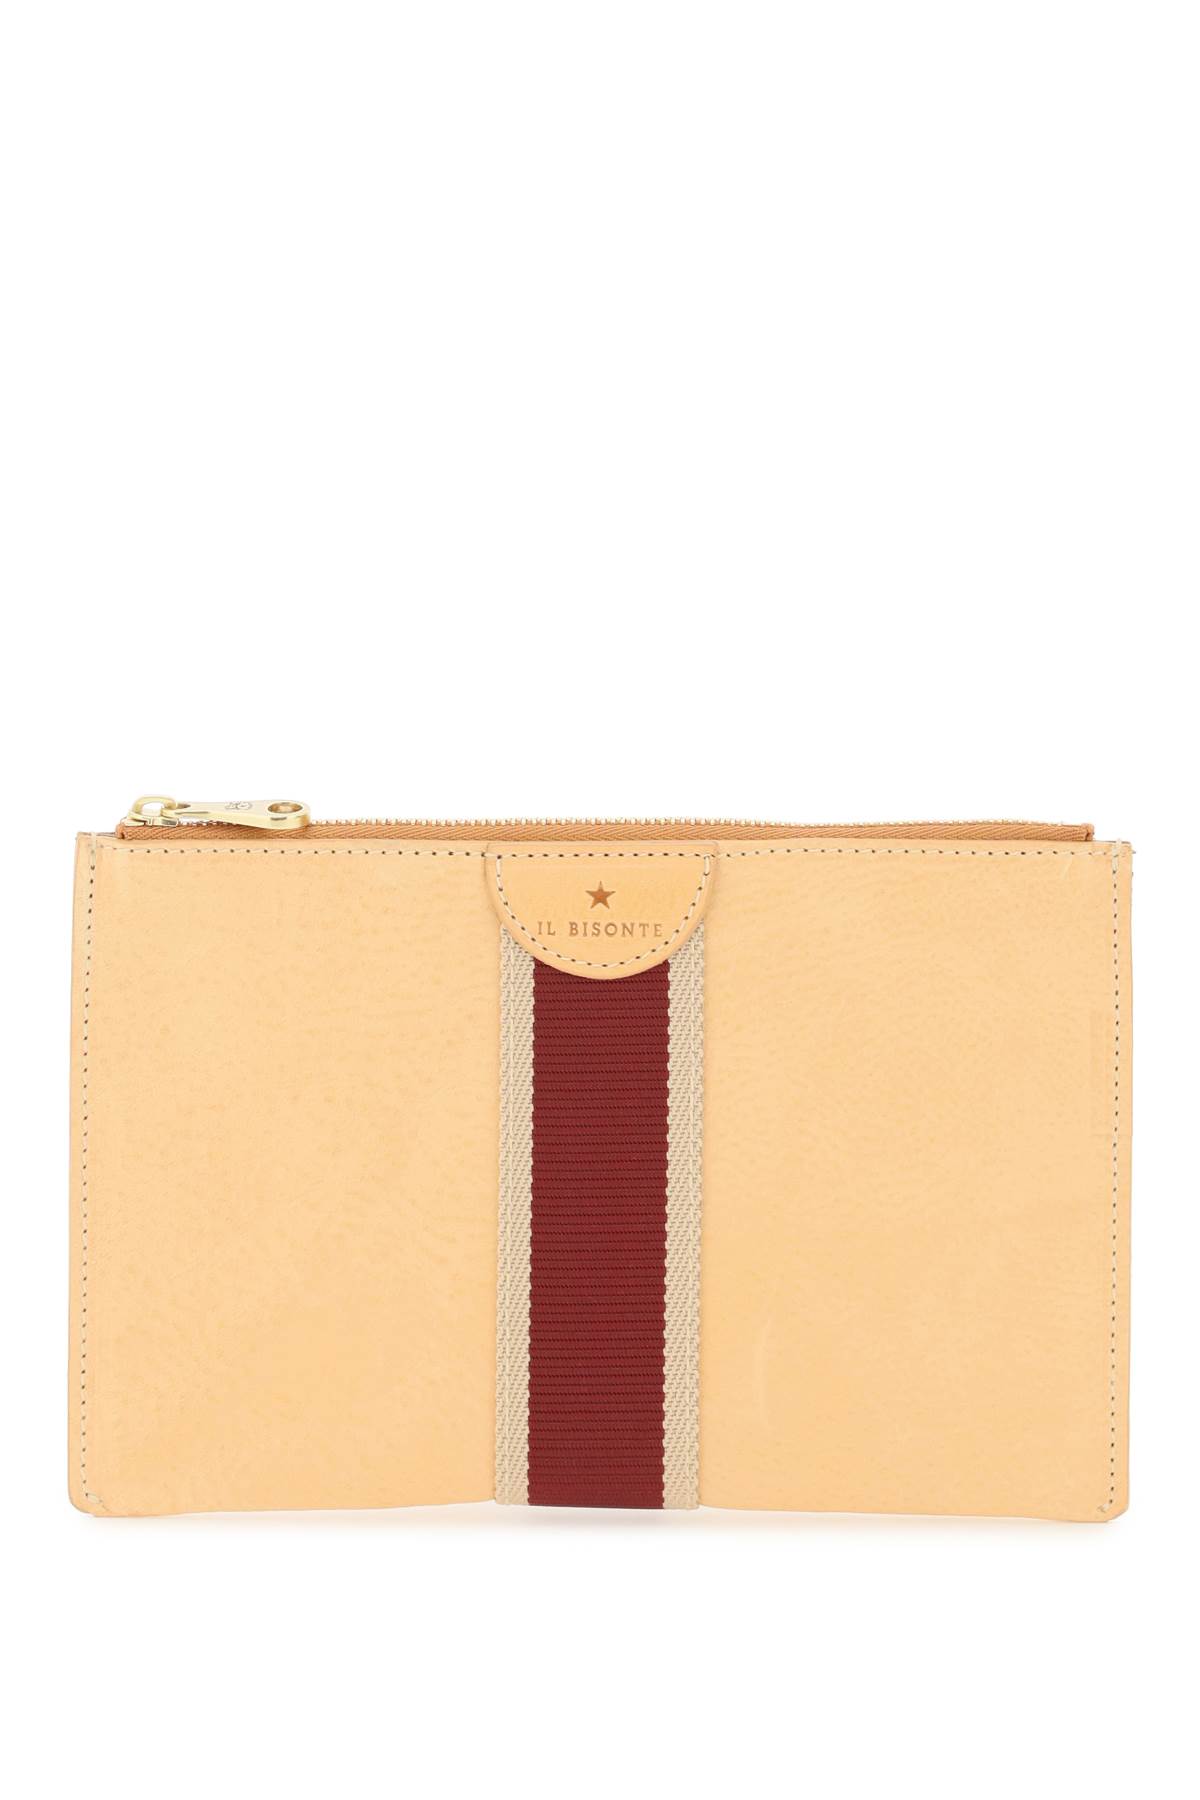 Il Bisonte Leather Pouch With Ribbon In Naturale (beige)